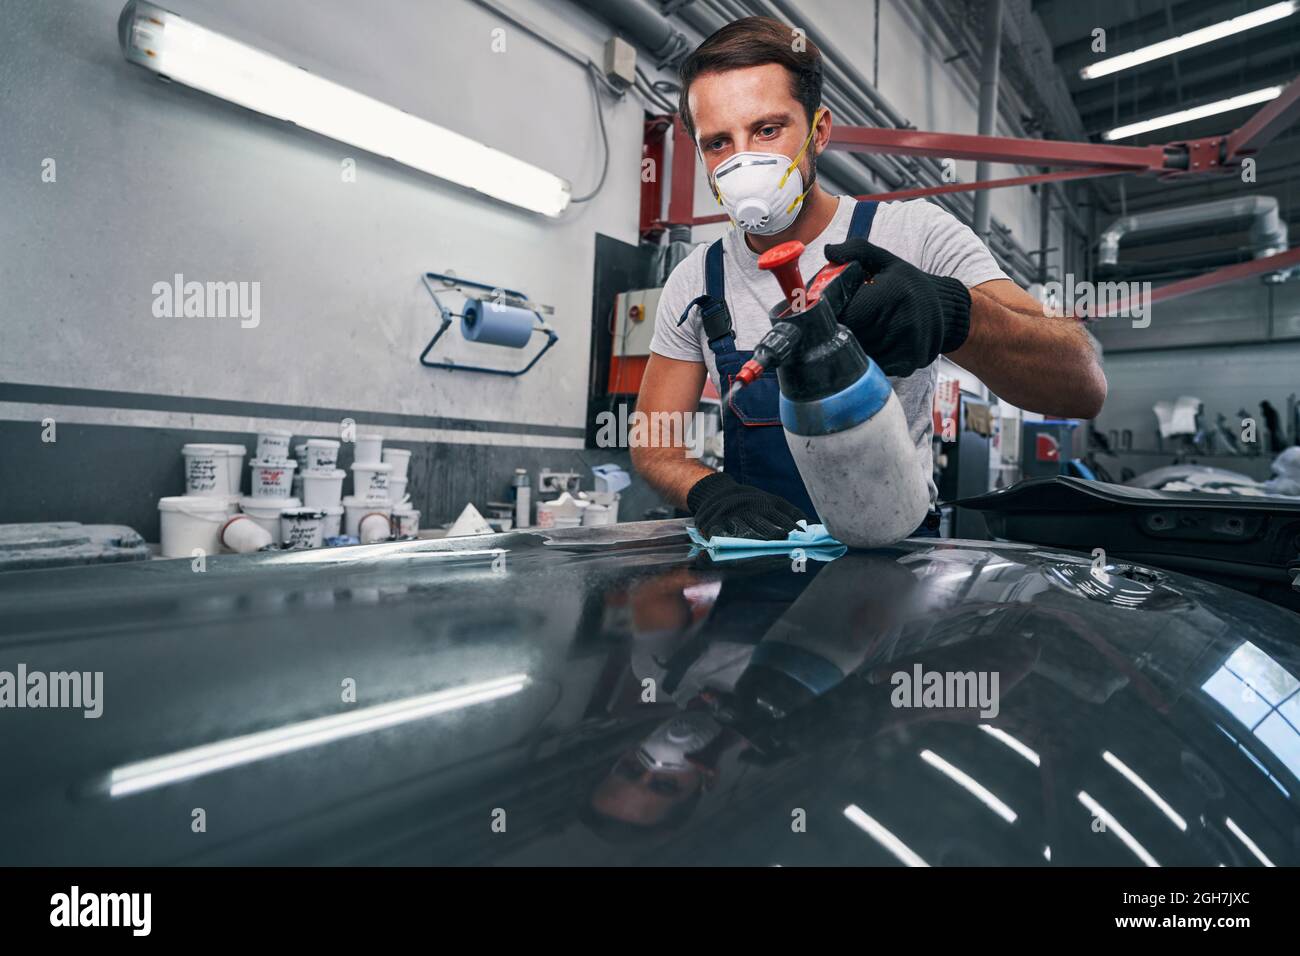 Car mechanic spraying surface from plastic container Stock Photo